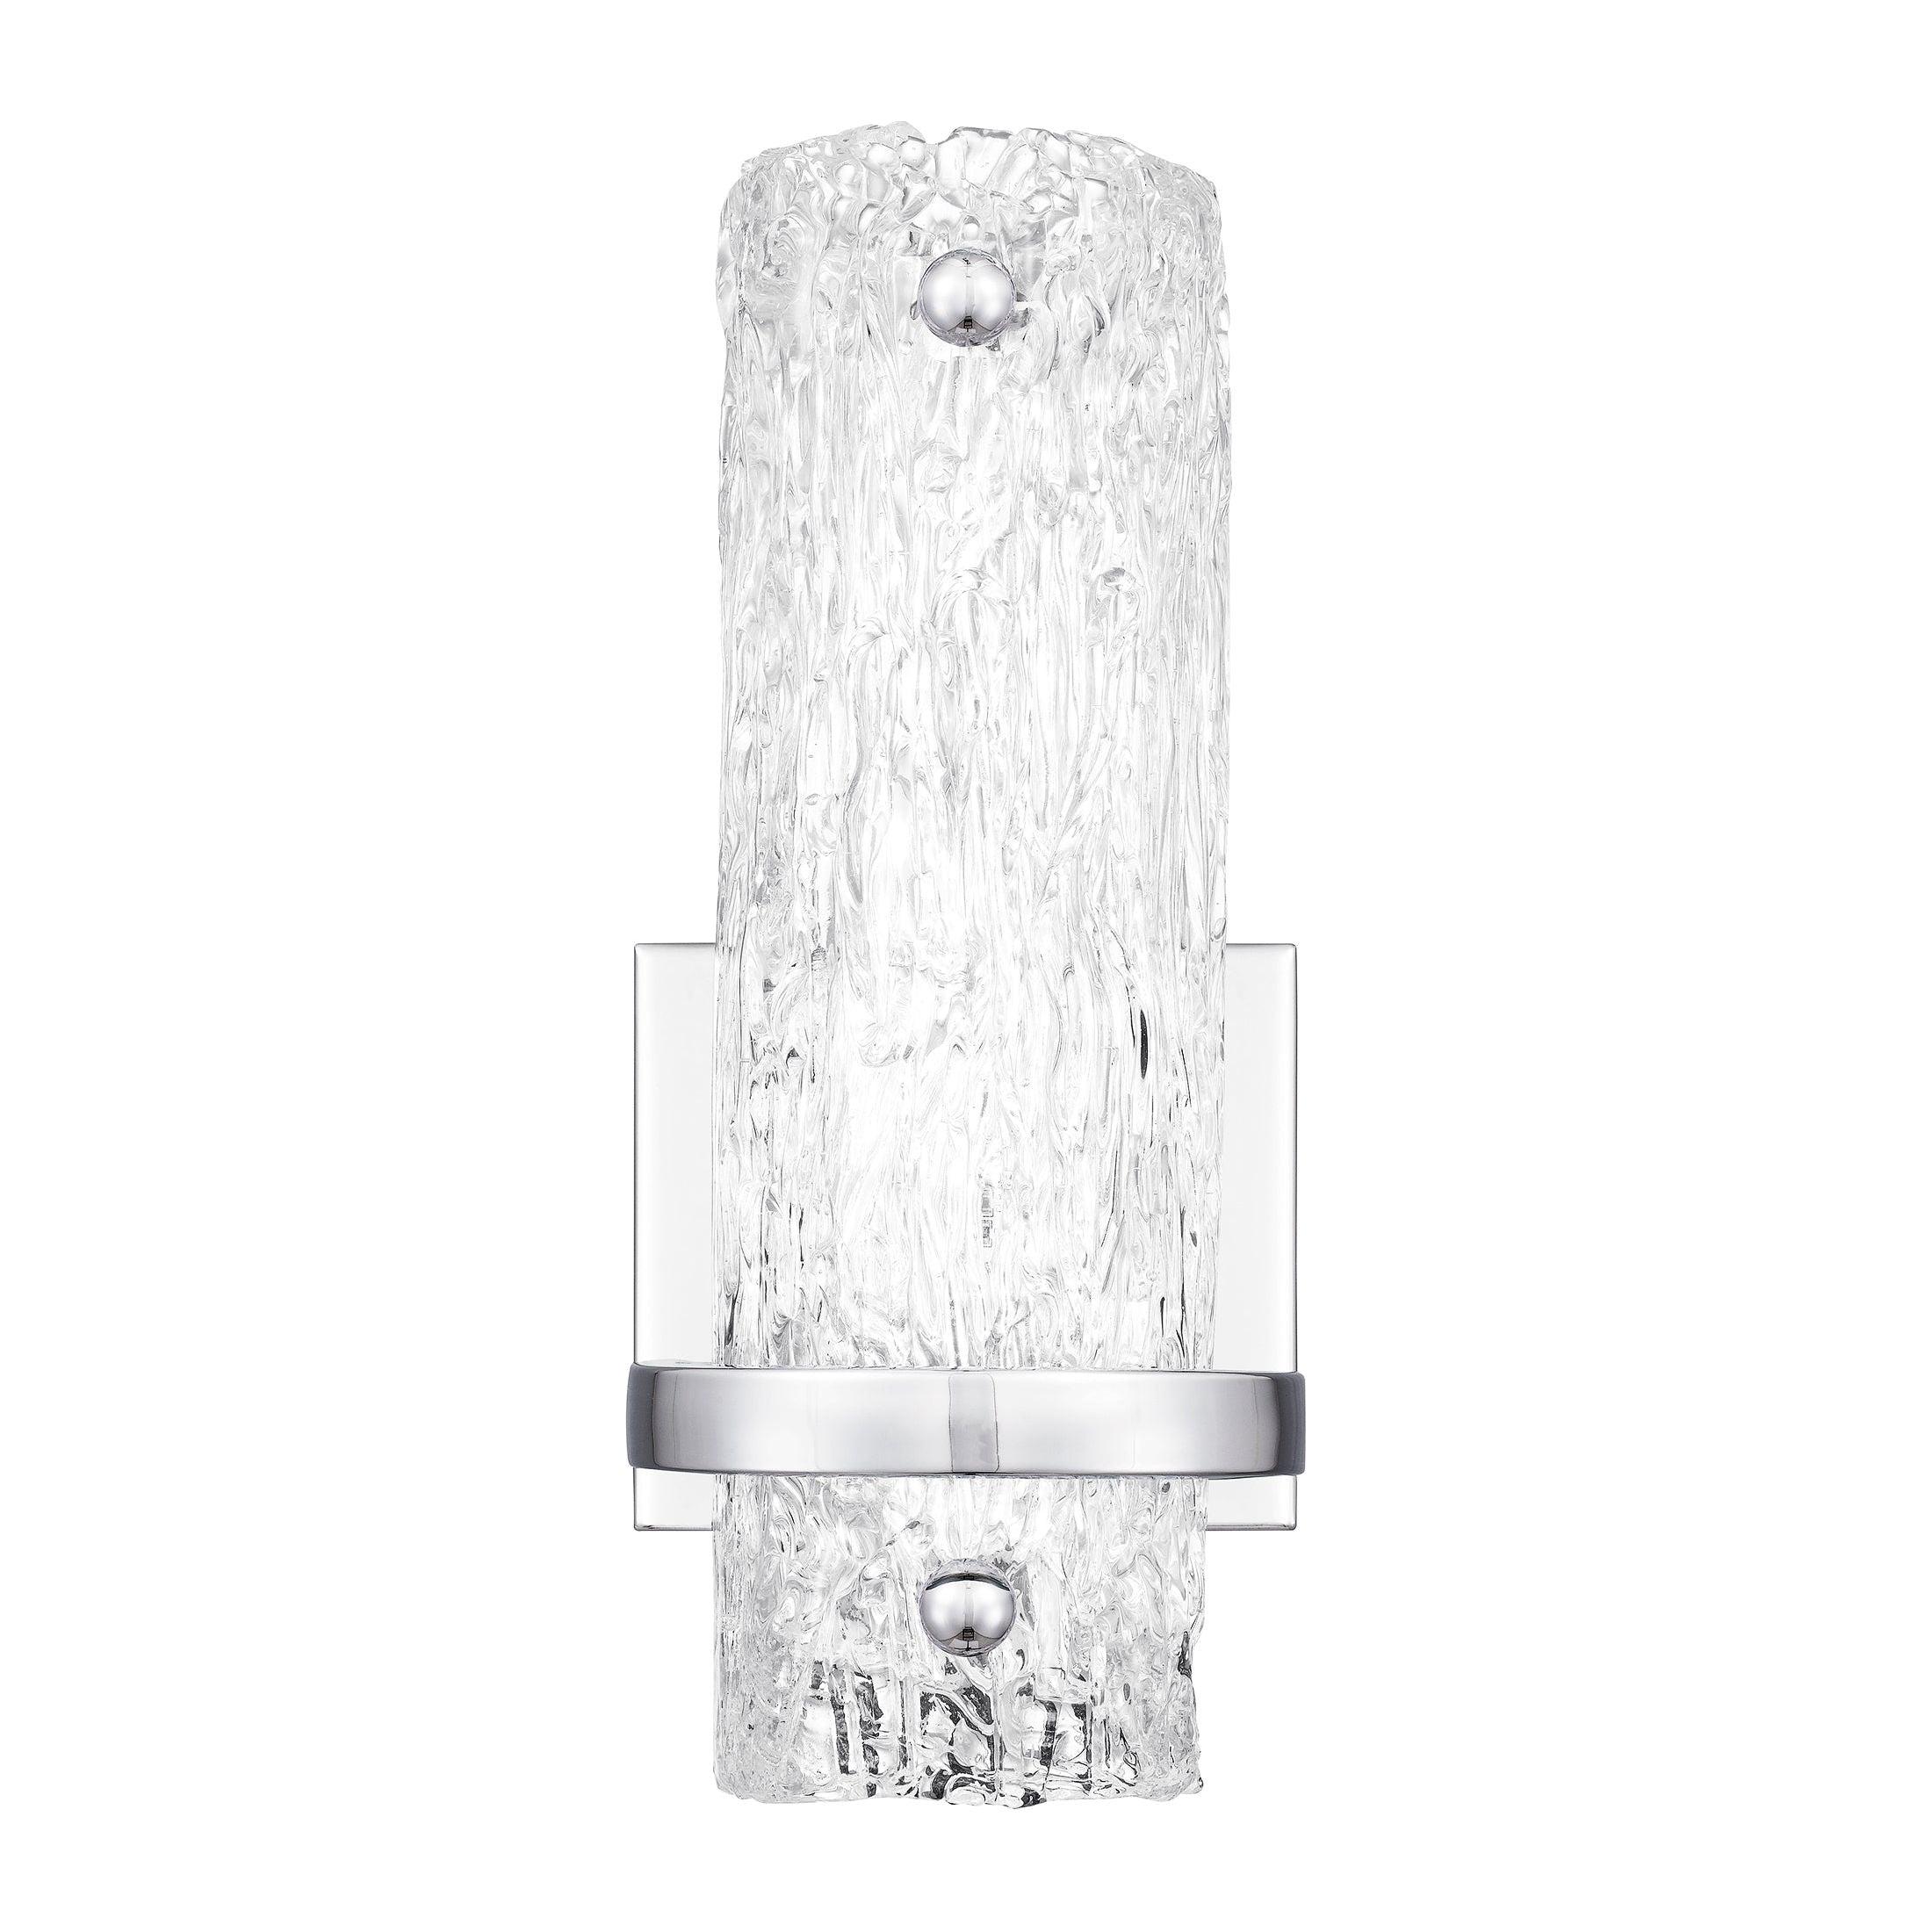 Quoizel - Pell Sconce - Lights Canada